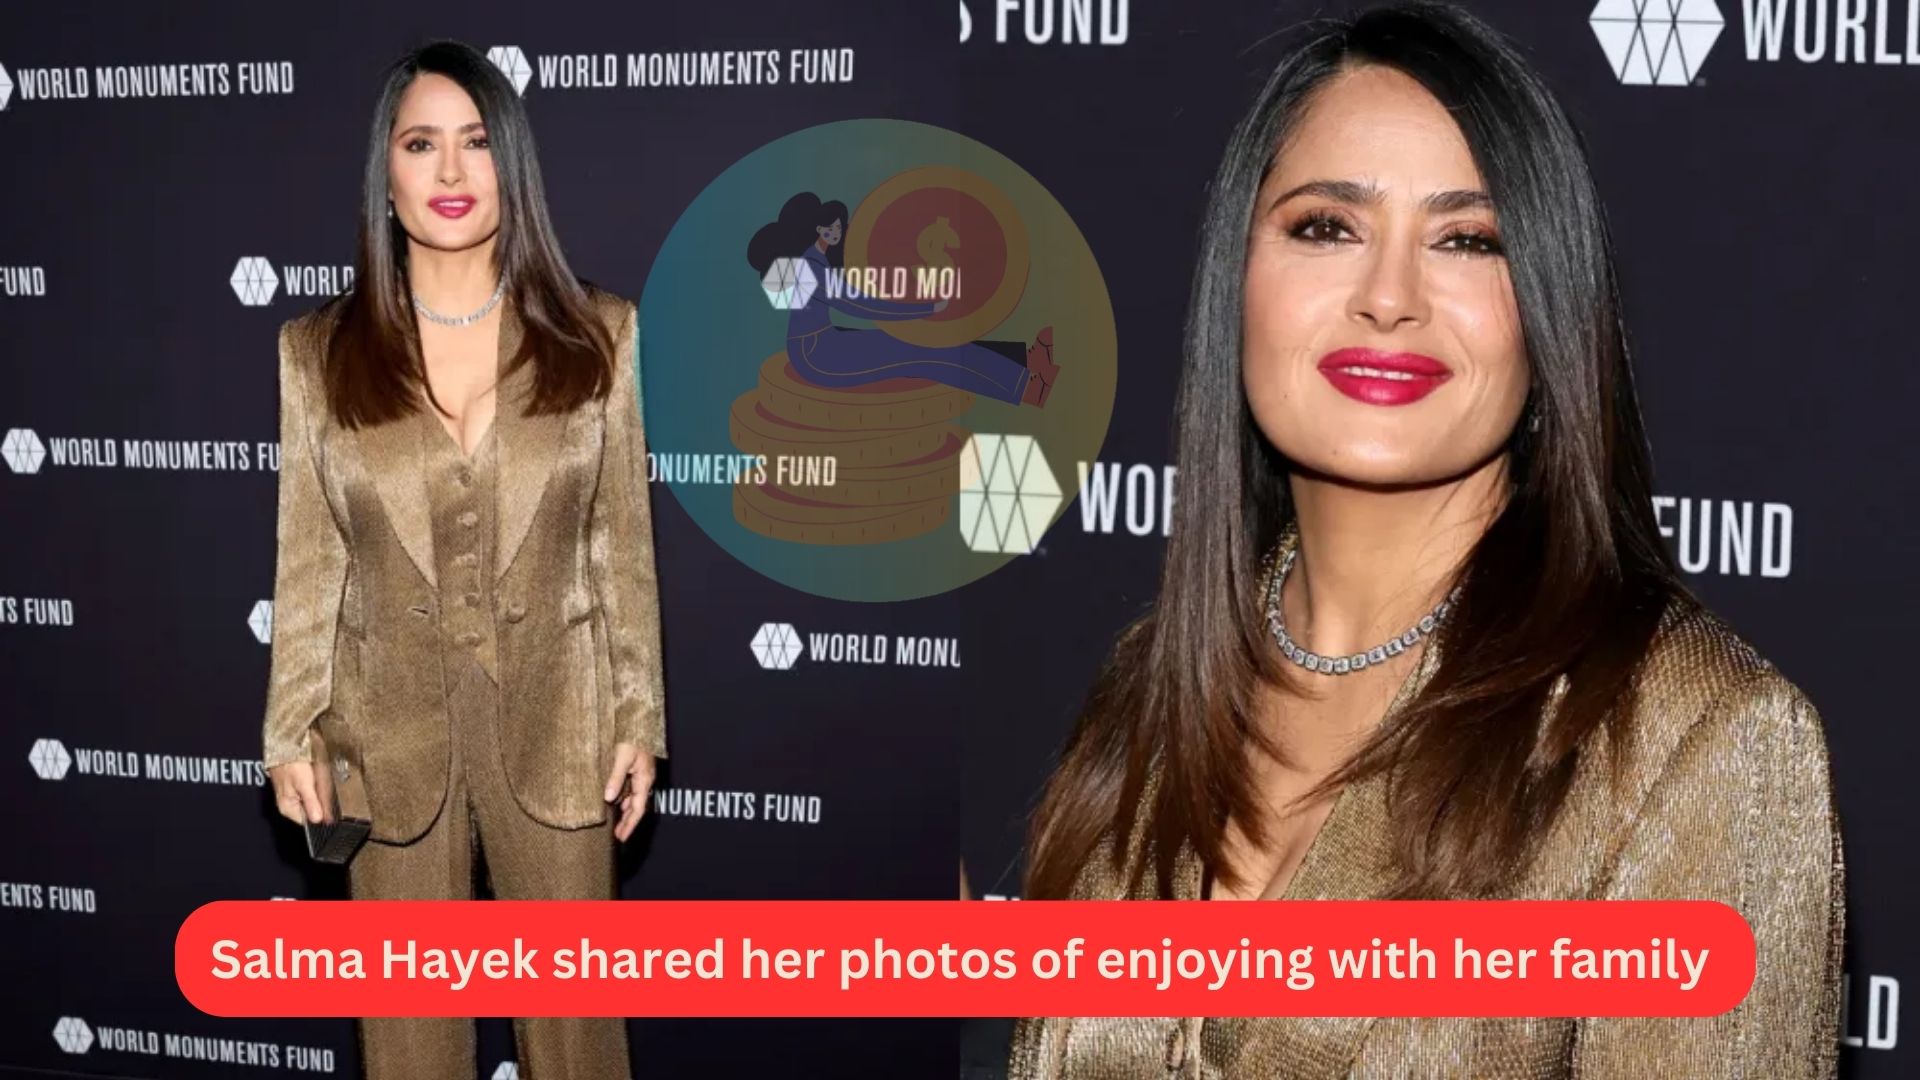 Salma Hayek shared her photos of enjoying with her family